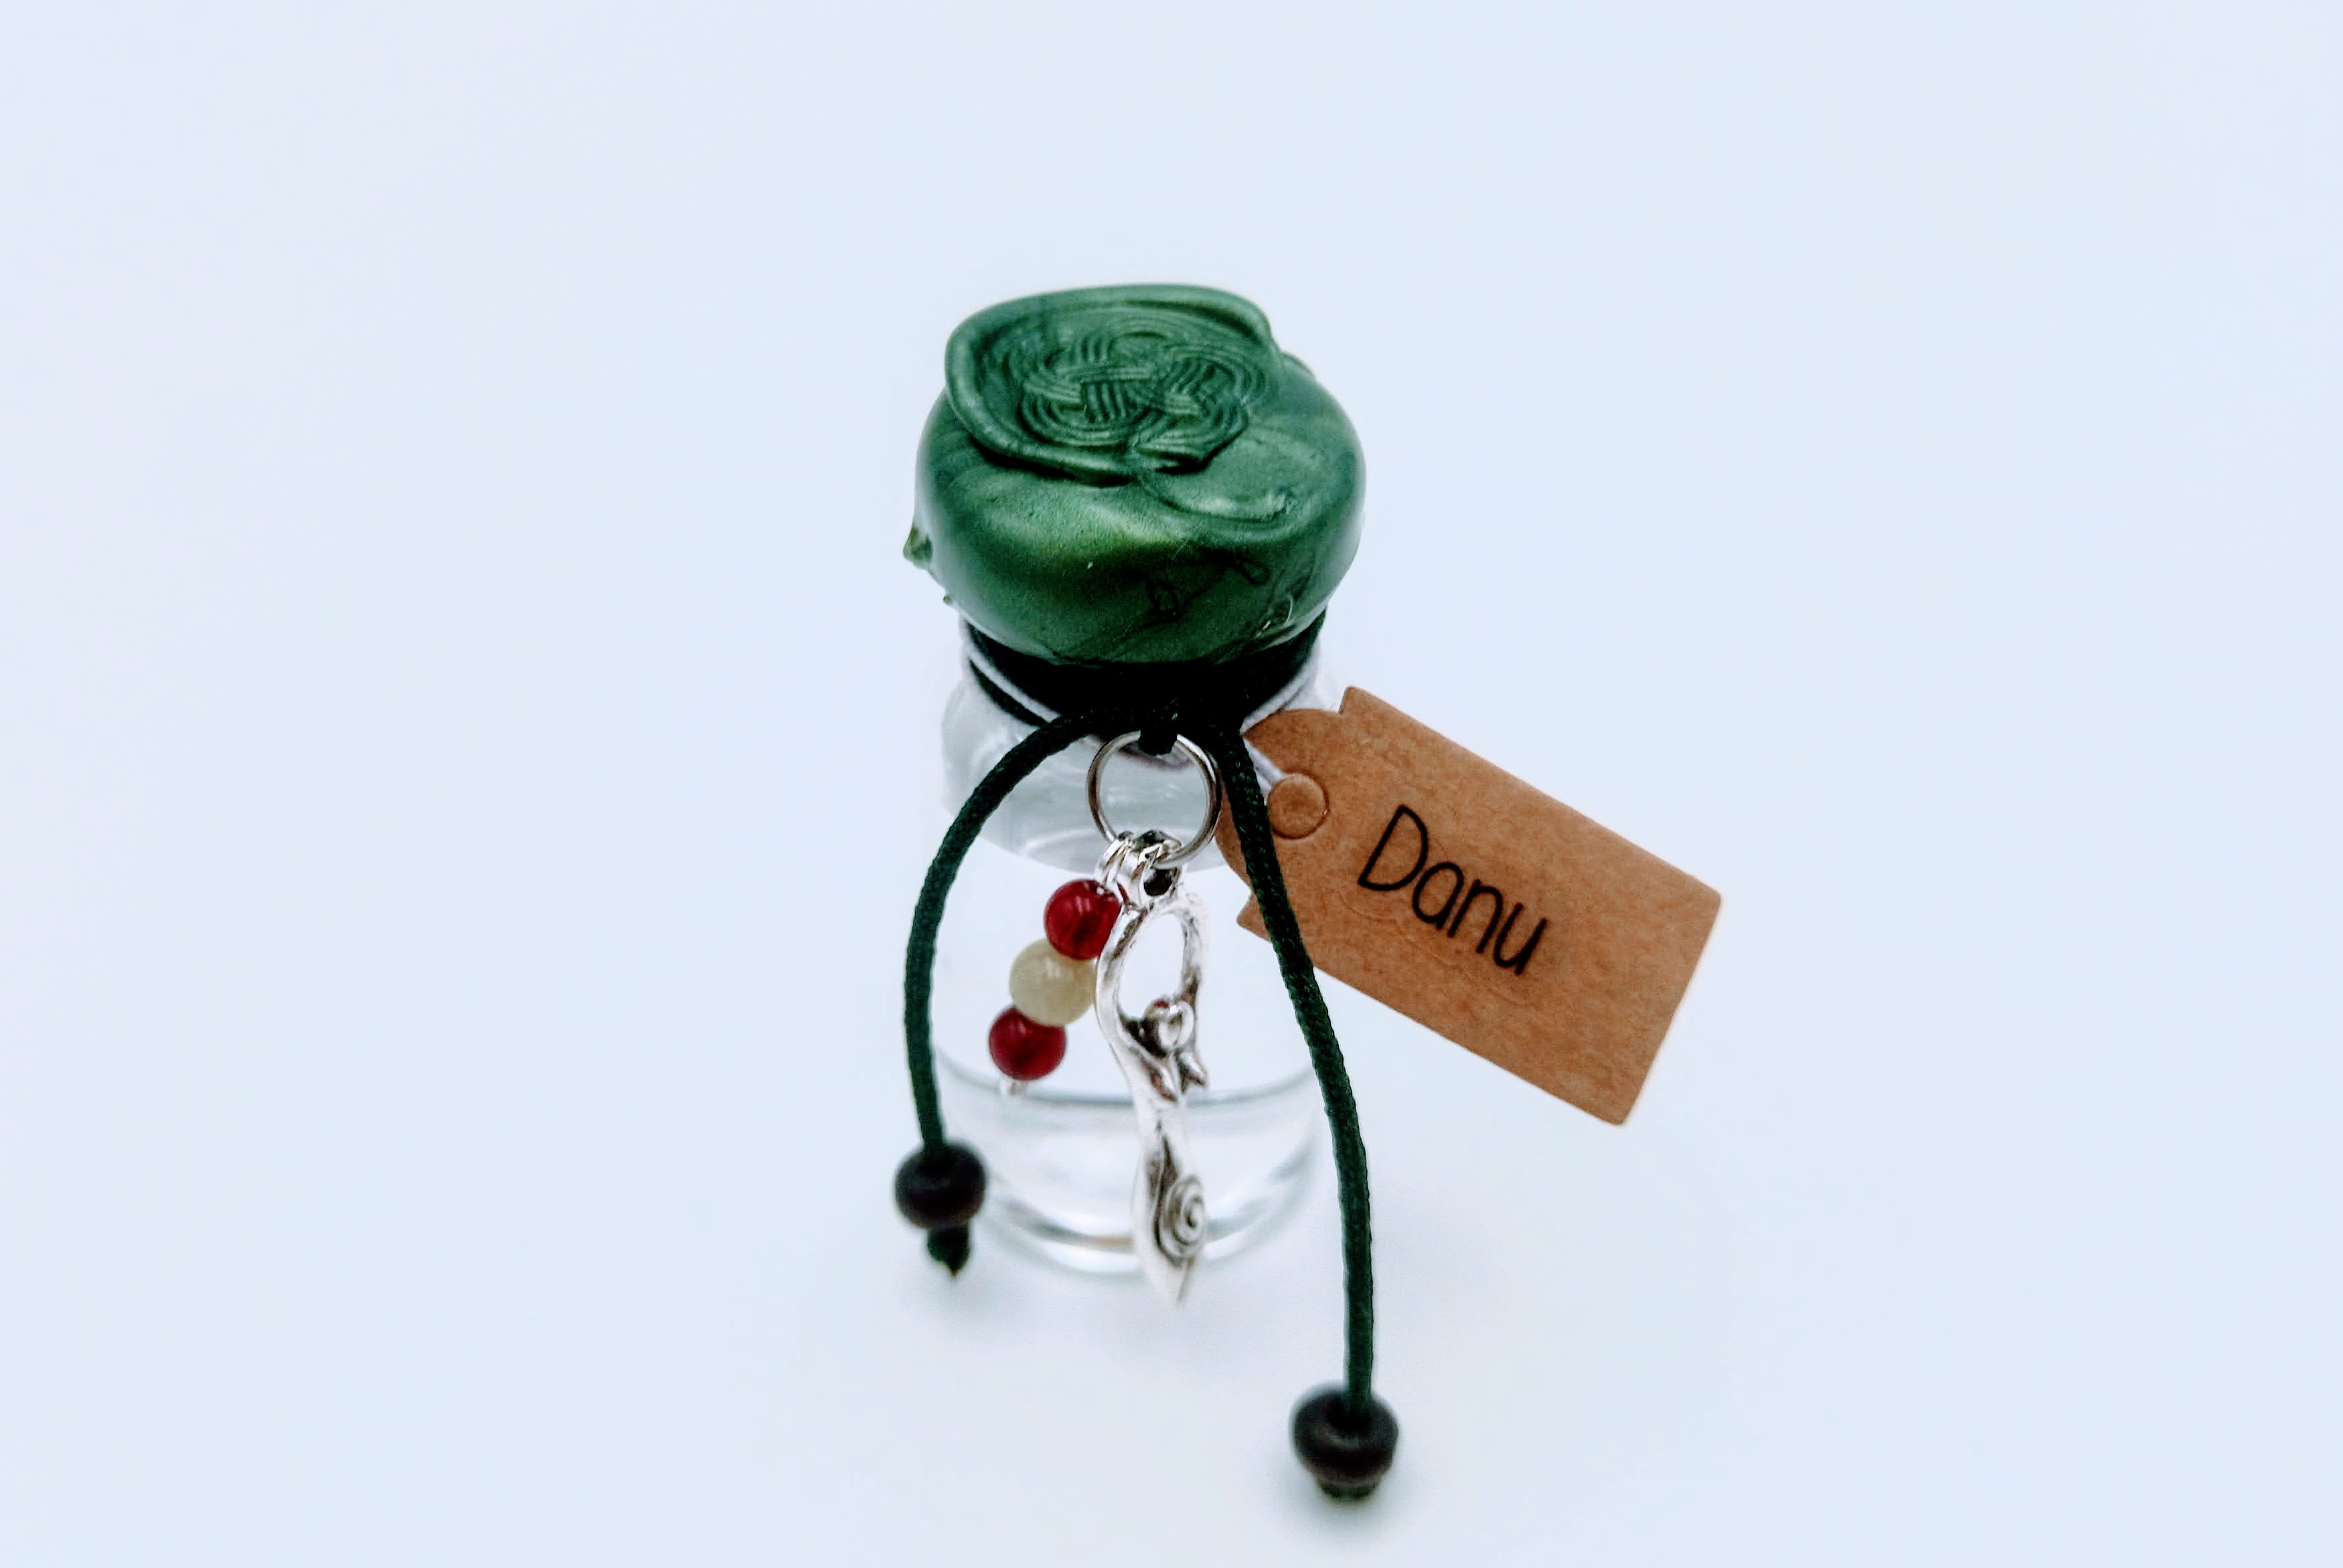 VIAL*Danu Goddess Mother of the Irish - filled with St.Brigid Well Water from an Irish Holy Well.